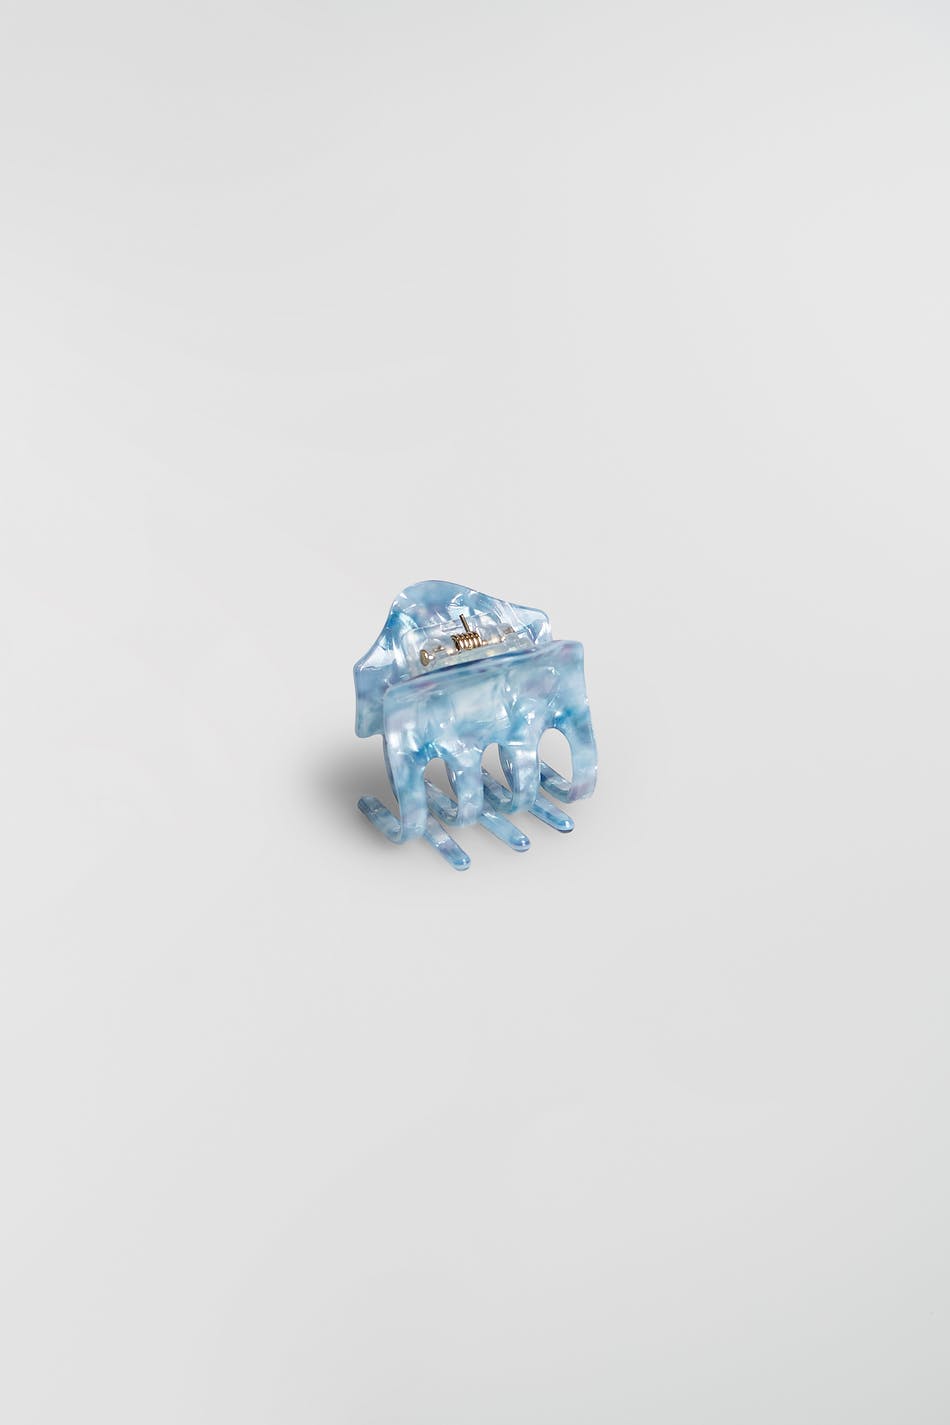 Gina Tricot My hair clip ONESIZE  Light blue (5439)